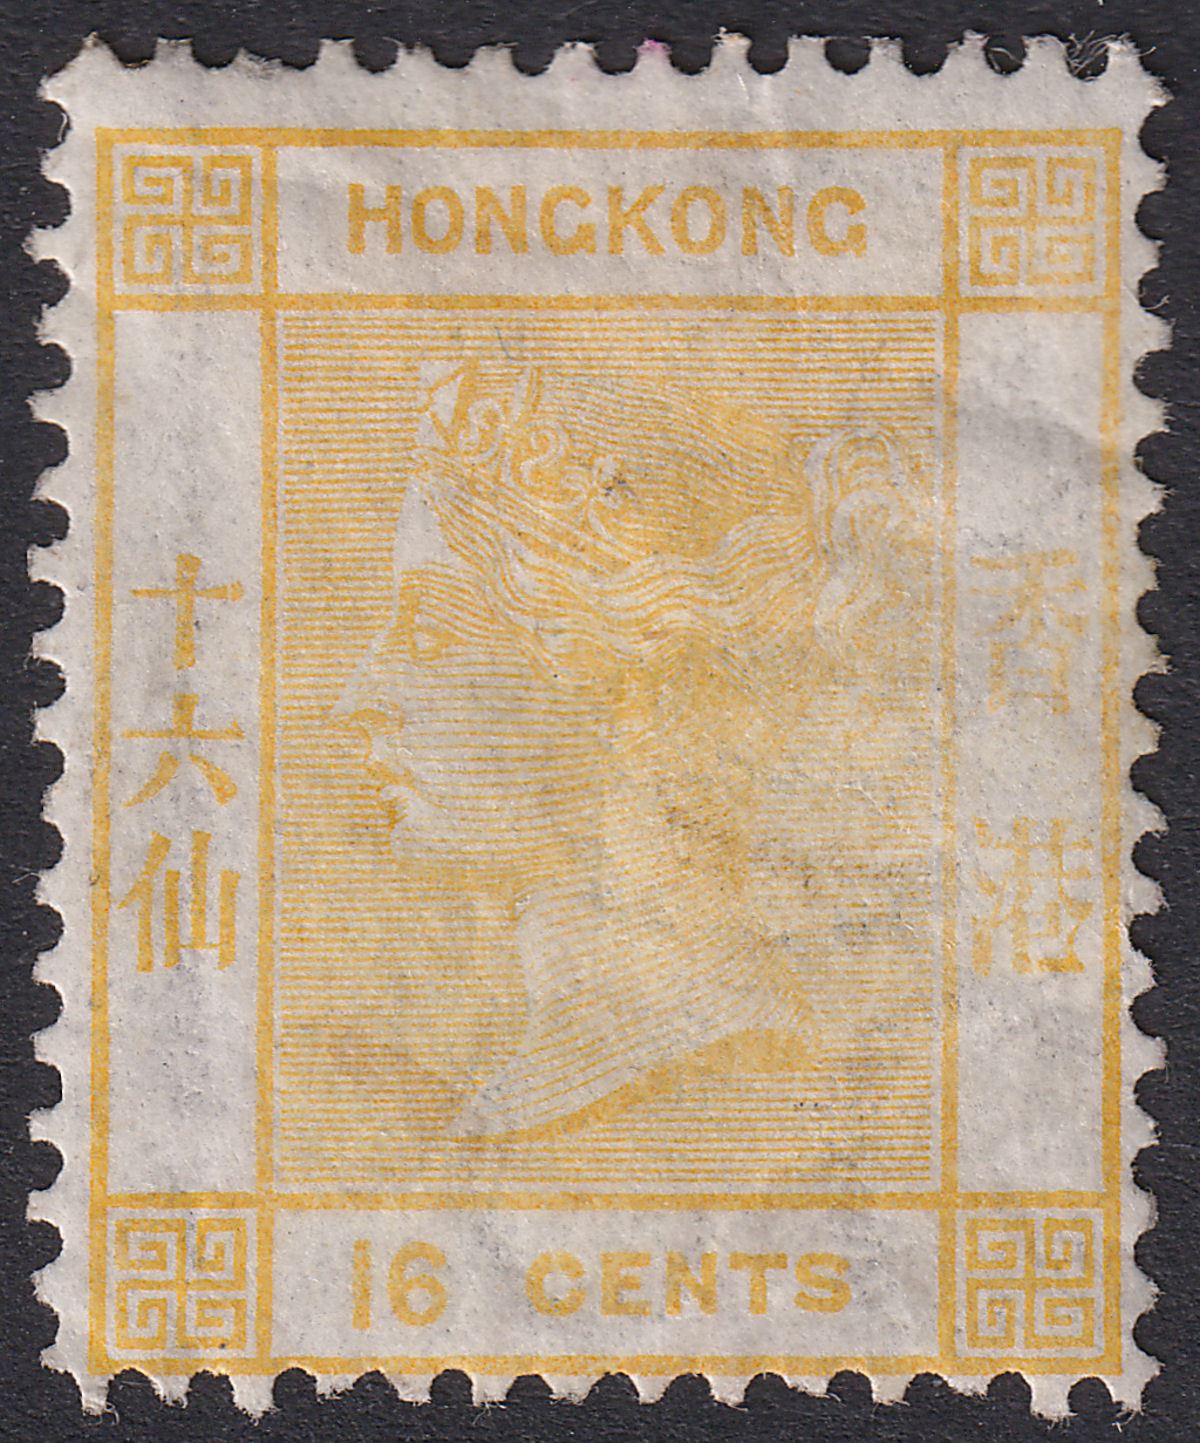 Hong Kong 1877 QV 16c Yellow Mint SG22 cat £2000 VERY CREASED worse than scan